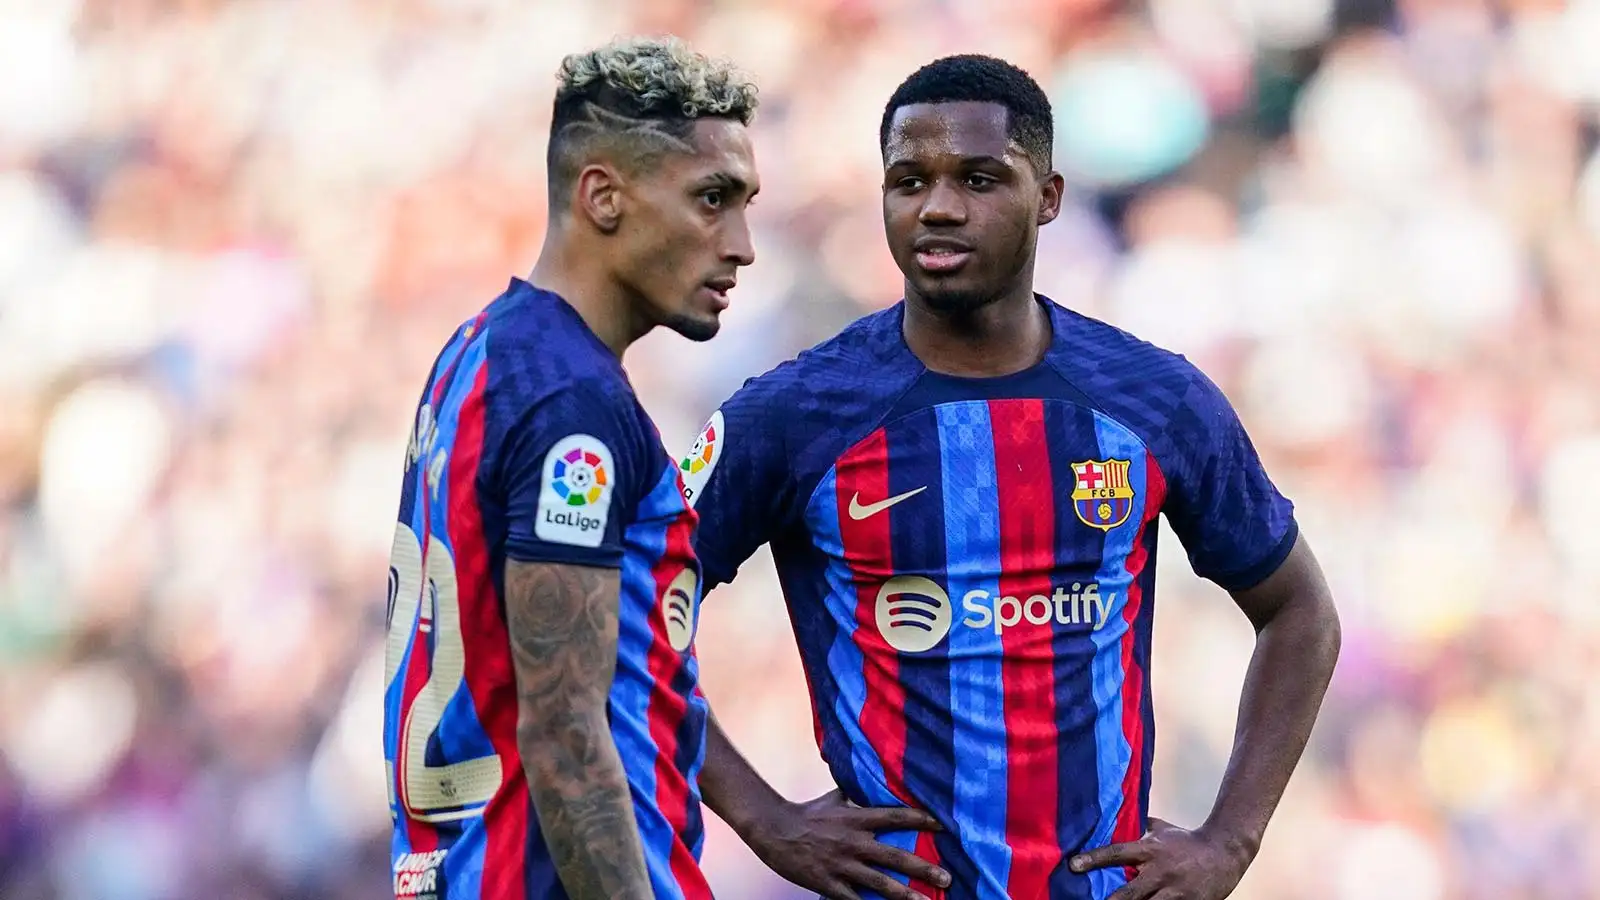 Raphael Dias Belloli Raphinha and Ansu Fati of FC Barcelona during the La Liga match between FC Barcelona and Valencia CF played at Spotify Camp Nou Stadium on March 05, 2023 in Barcelona, Spain.